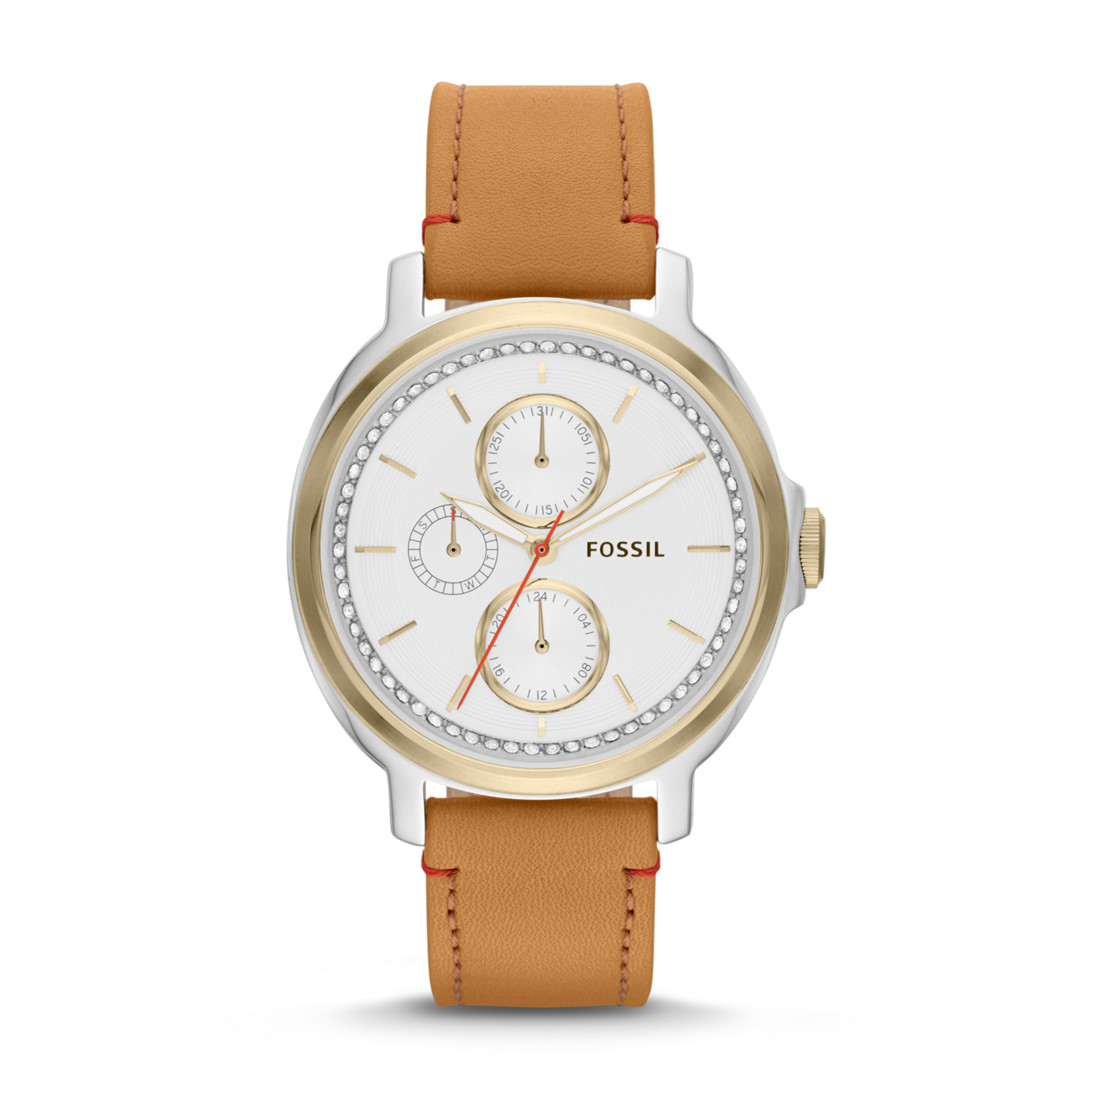 Original Fossil Watches by geniehour: Fossil Women's ES3523 Leather ...